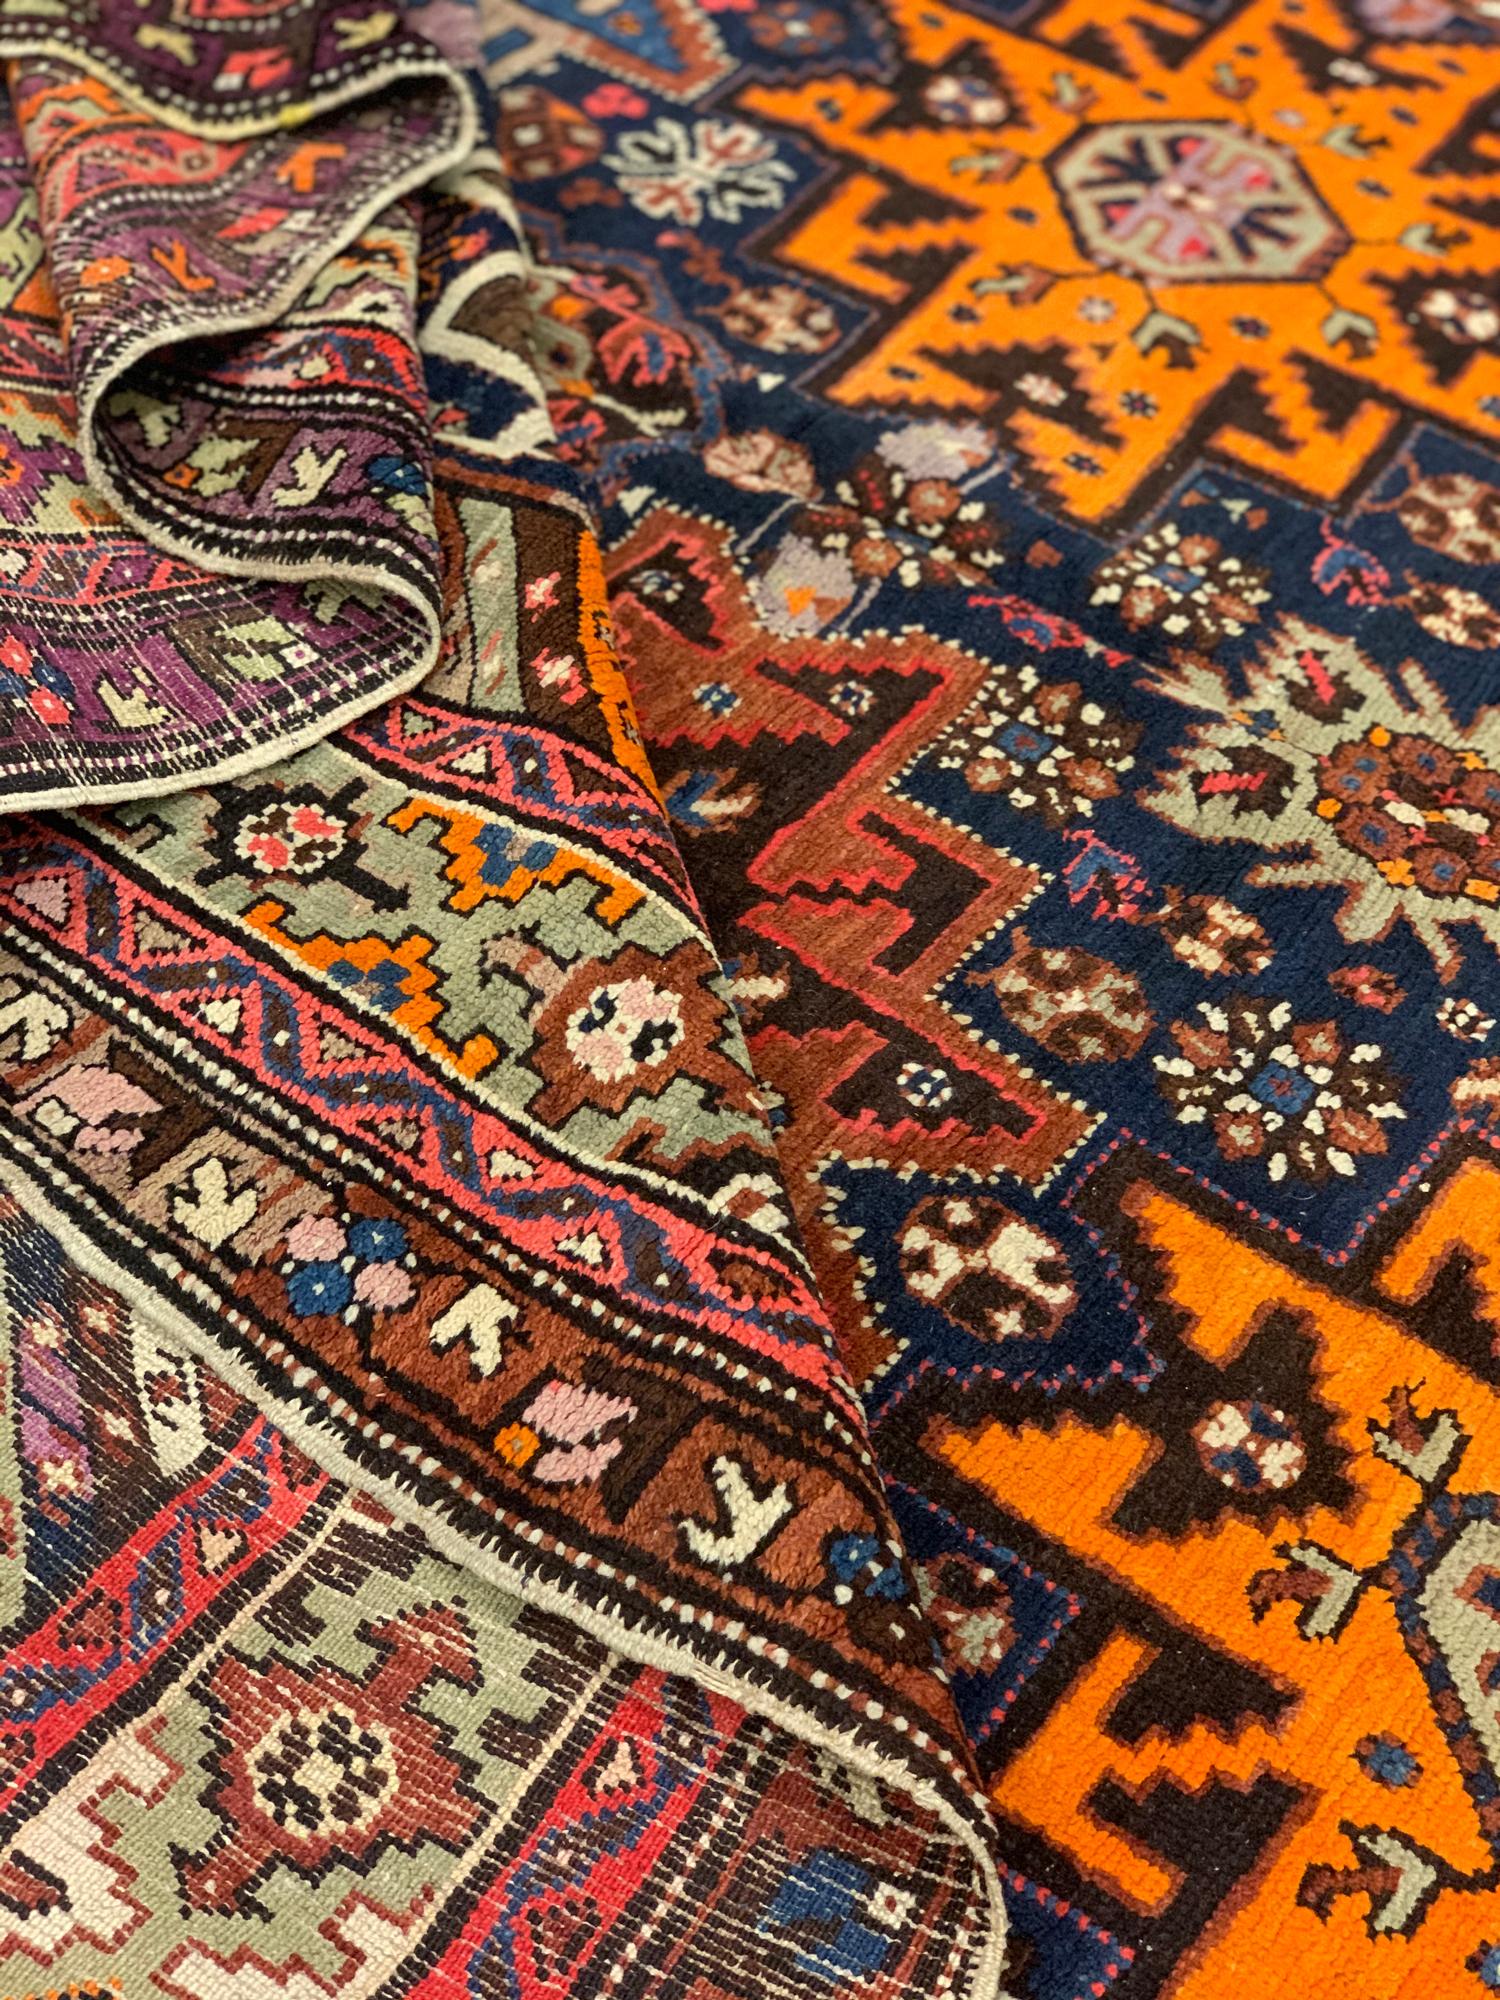 This fine Kazak wool area rug is a fantastic example of antique rugs woven in the early 21st century in the Kazak region of Caucasia. The design features a traditional geometric star pattern, traditionally seen in the Caucasian design. The bold